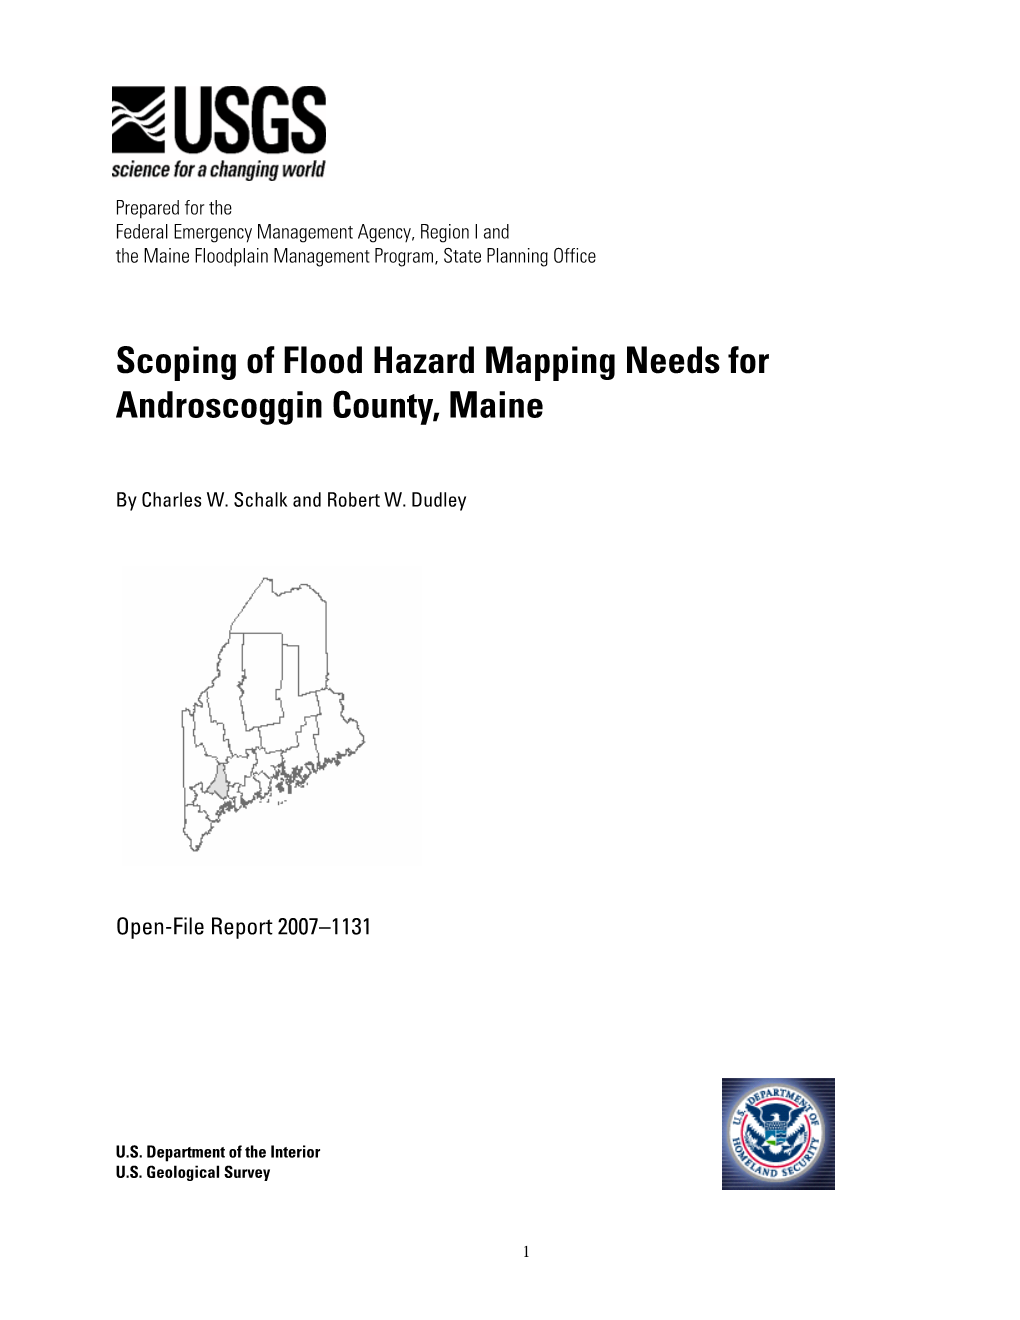 Scoping of Flood Hazard Mapping Needs for Androscoggin County, Maine